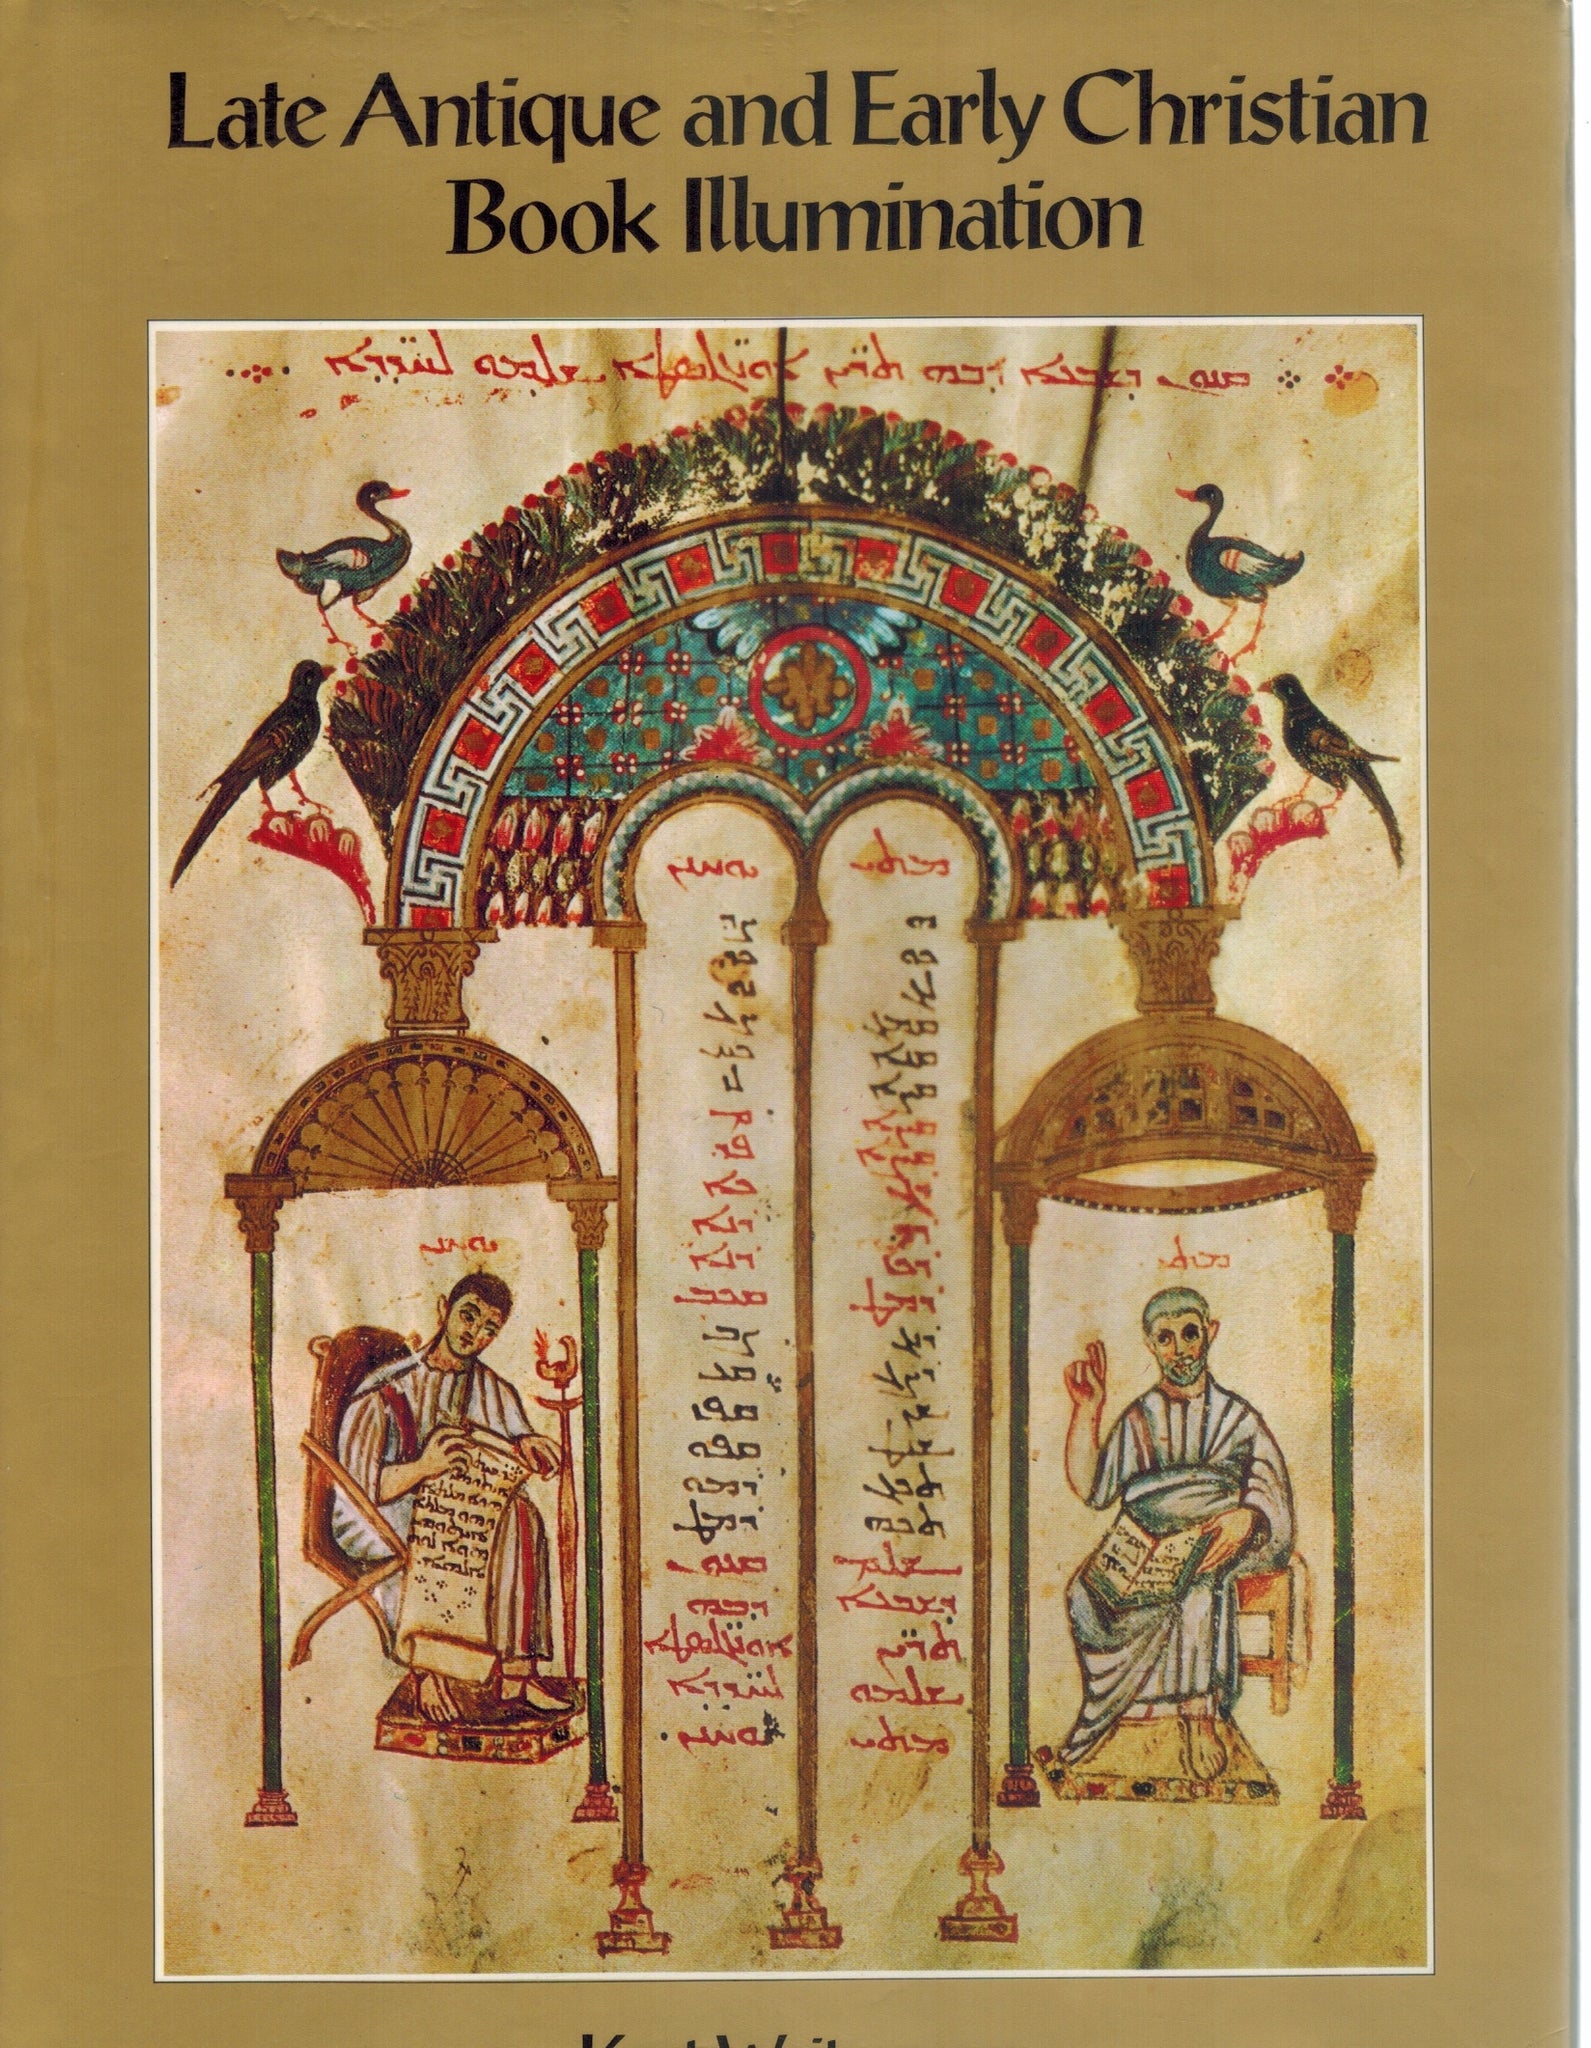 LATE ANTIQUE AND EARLY CHRISTIAN BOOK ILLUMINATION